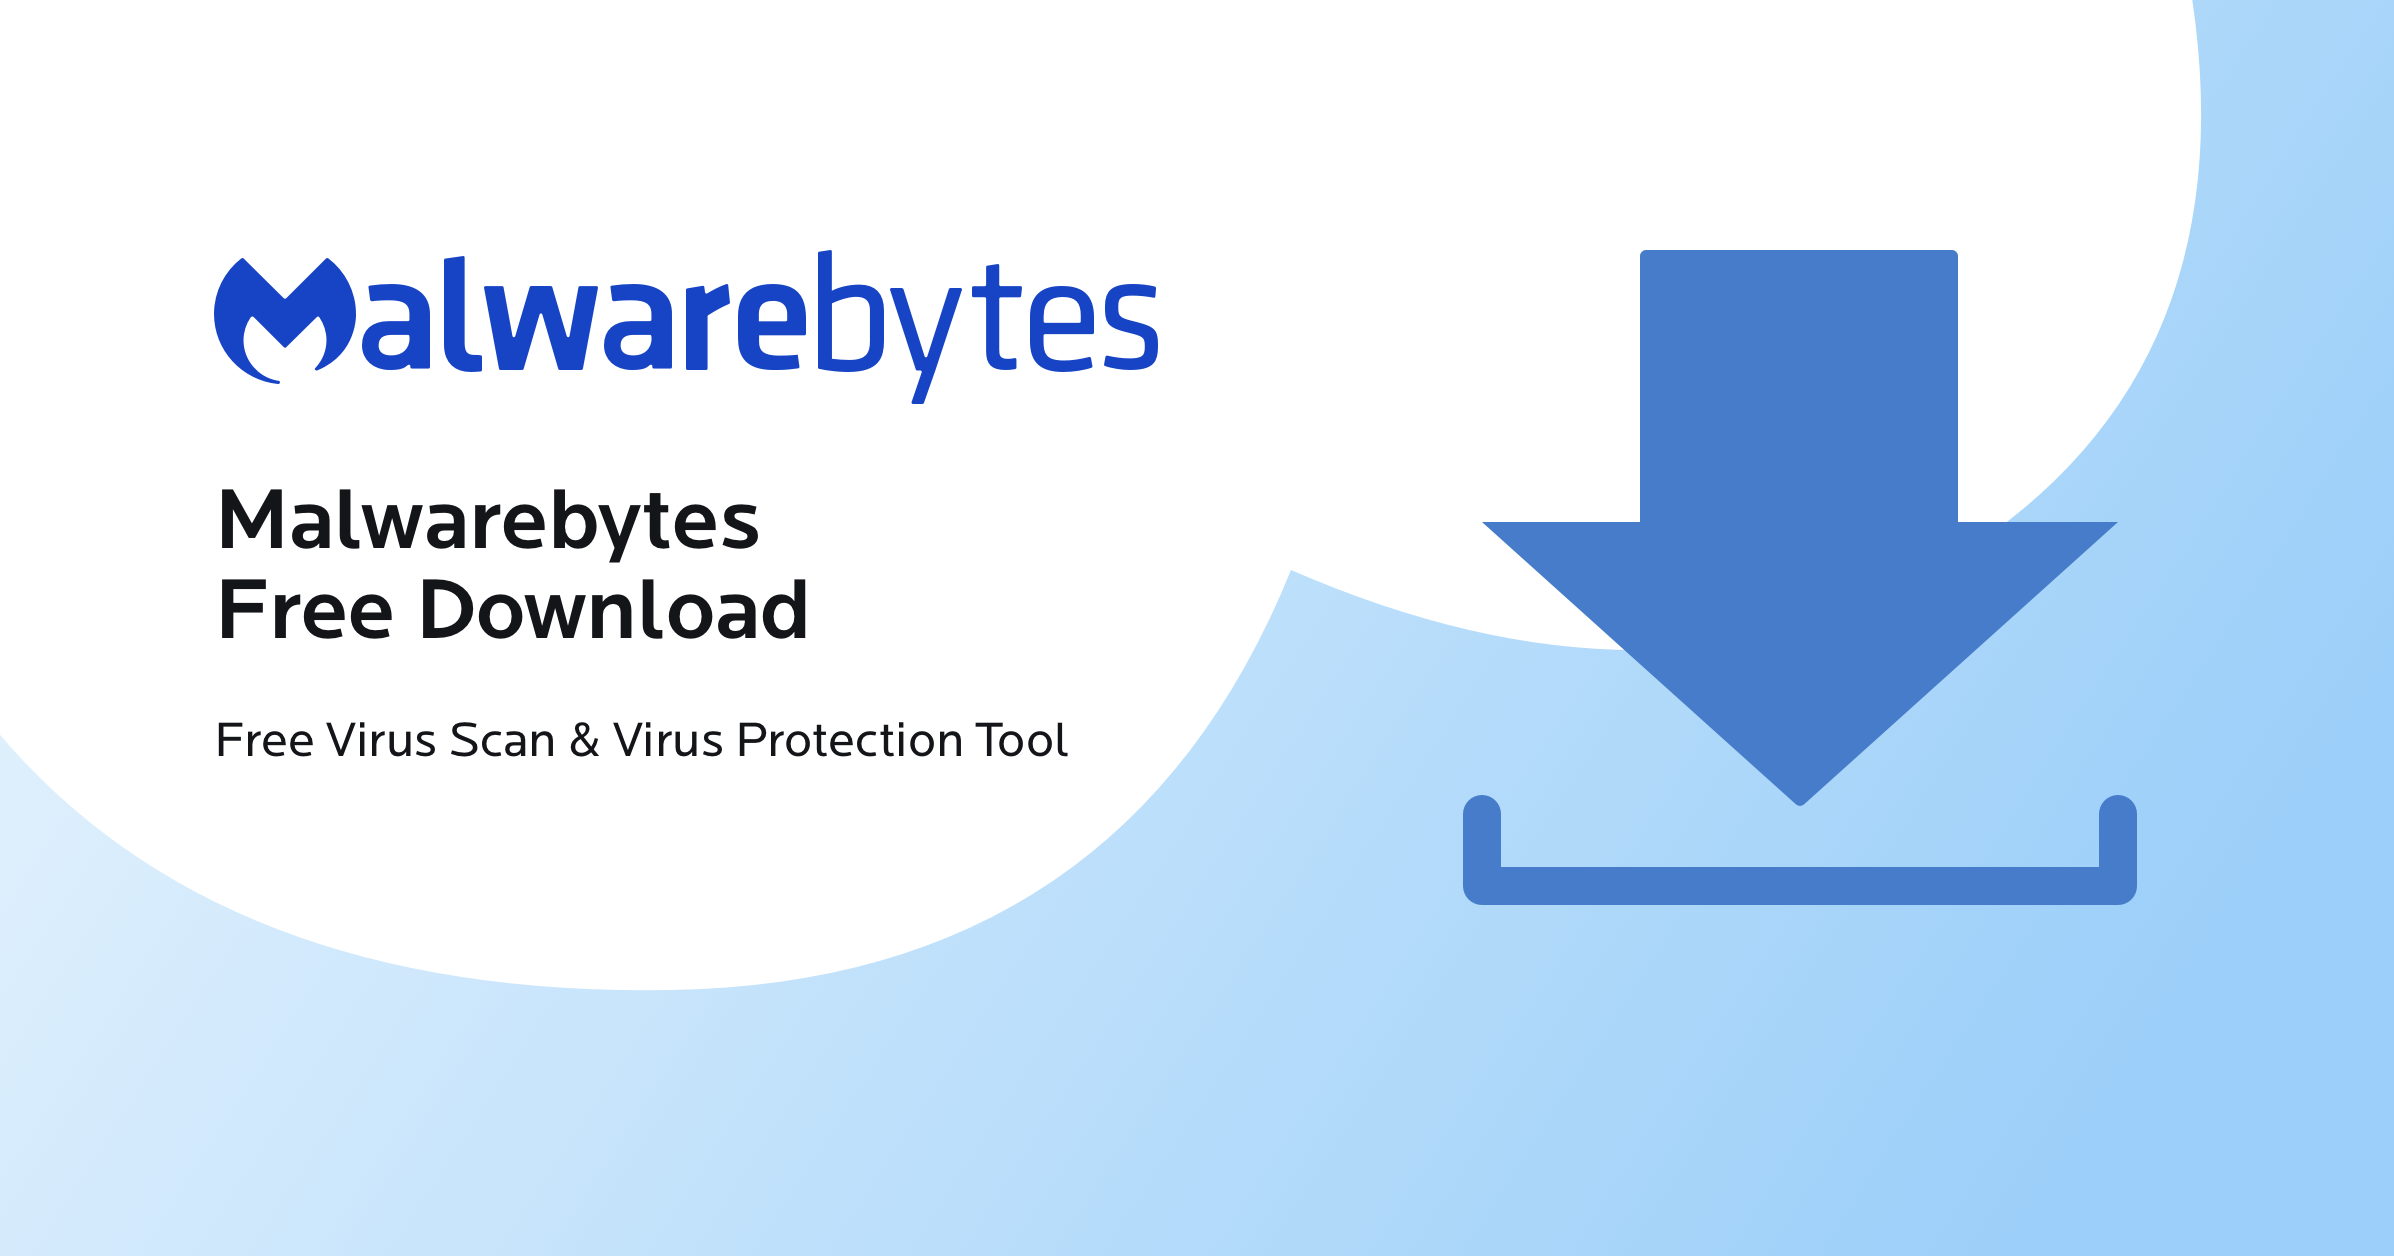 Download and install a reputable anti-malware program.
Update the anti-malware program to ensure it has the latest malware definitions.